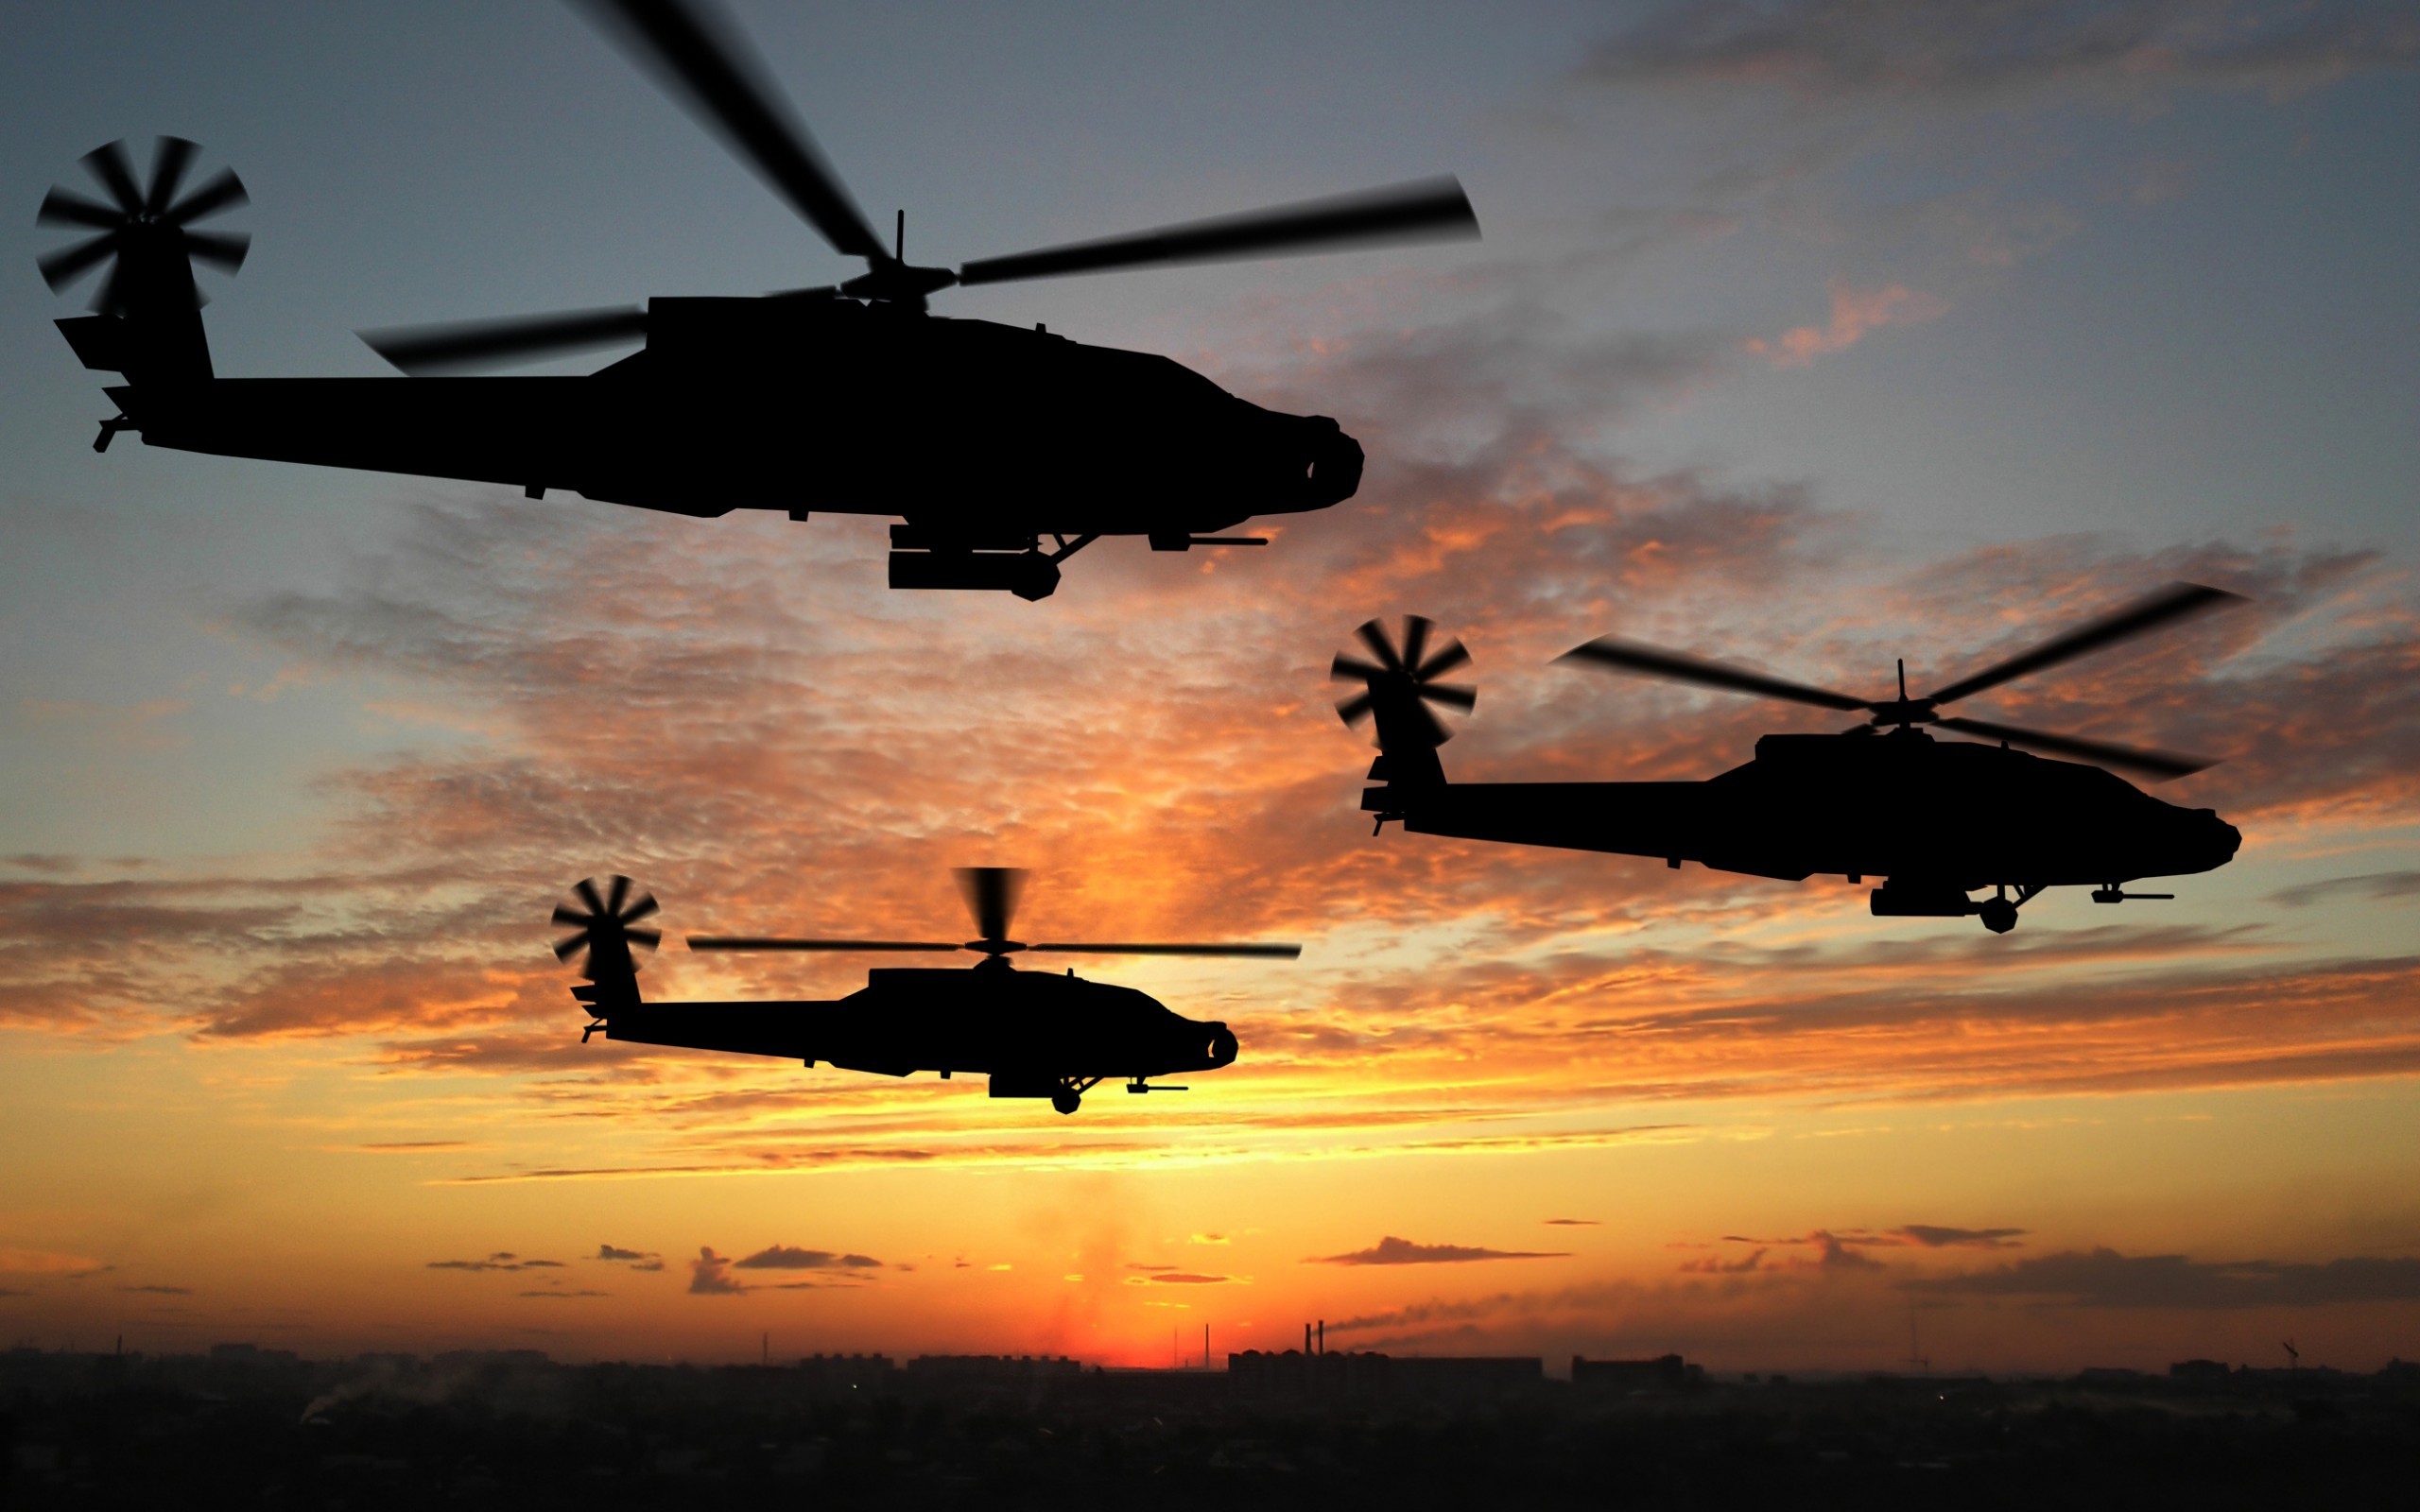 General 2560x1600 helicopters Boeing AH-64 Apache military silhouette military aircraft sunset clouds sky military vehicle vehicle aircraft sunlight dark attack helicopters